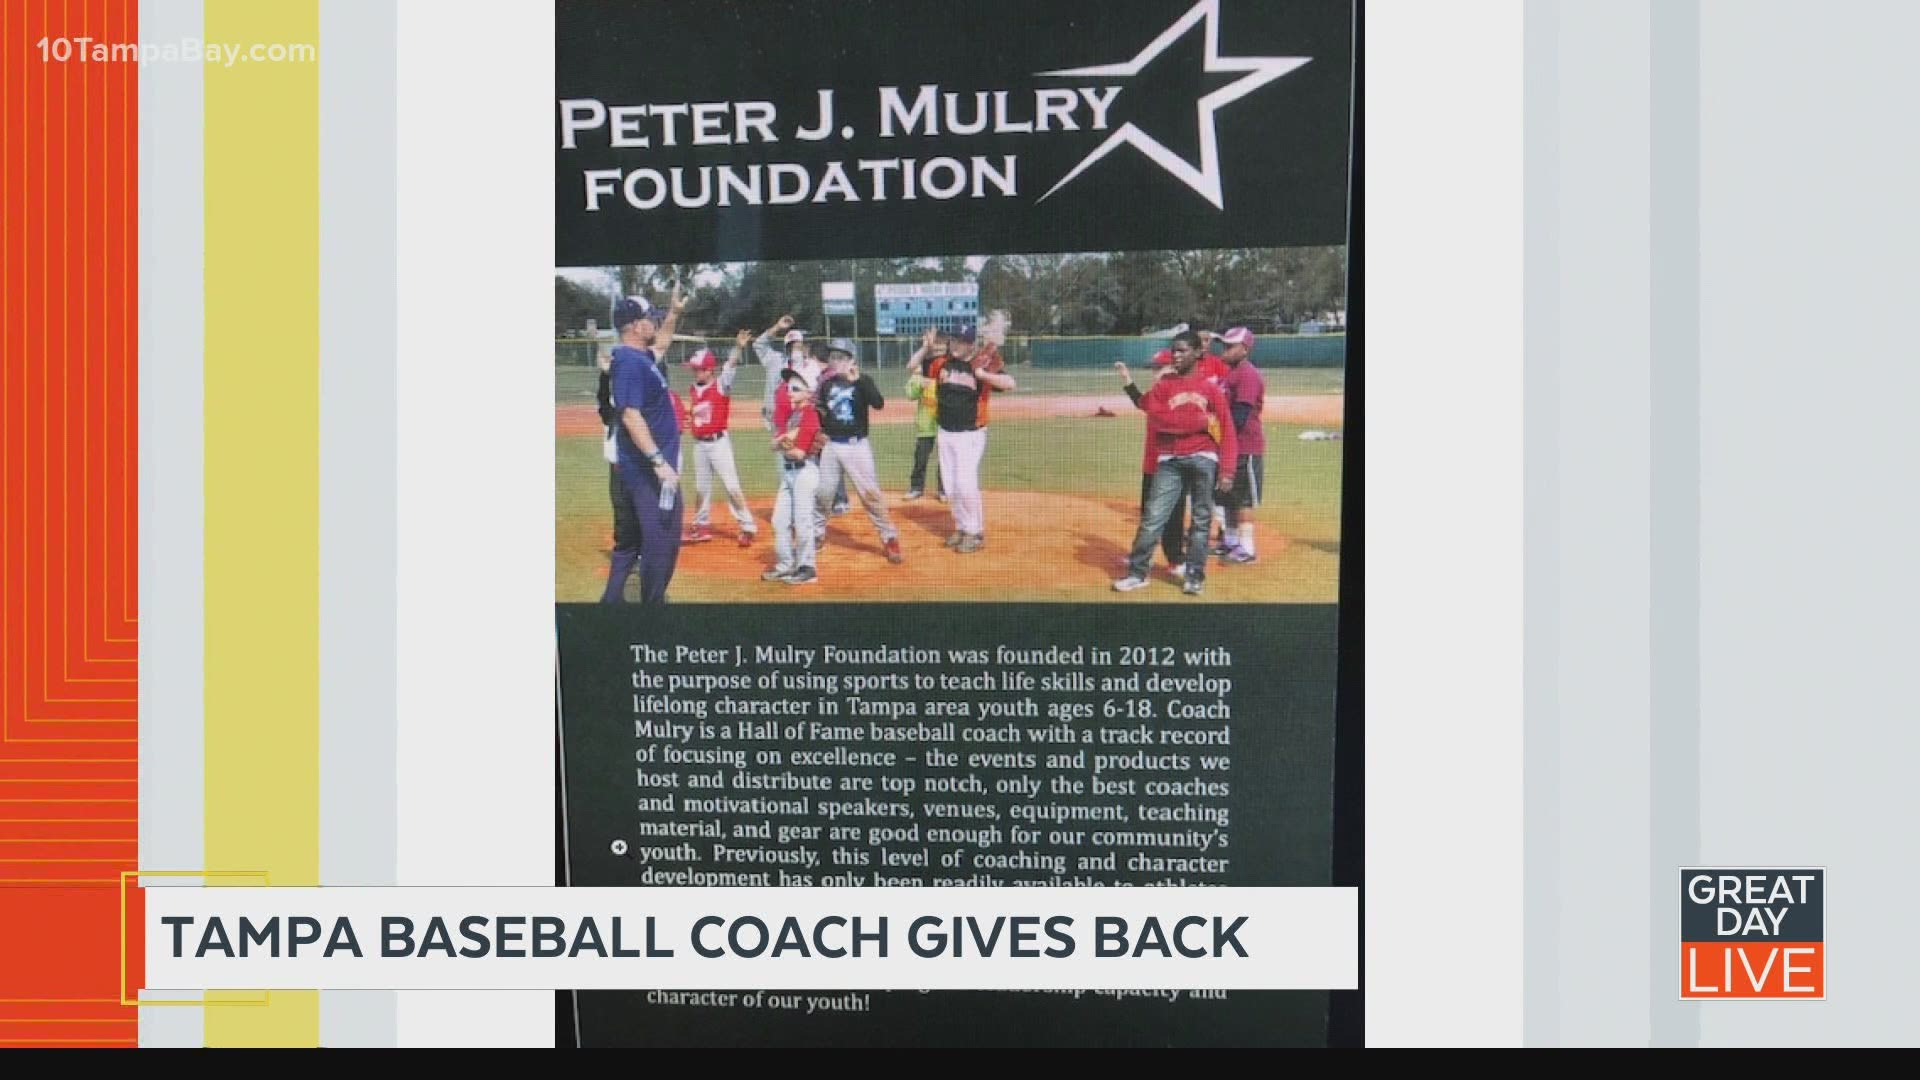 Former Tampa area baseball coach celebrates 20 years of giving back